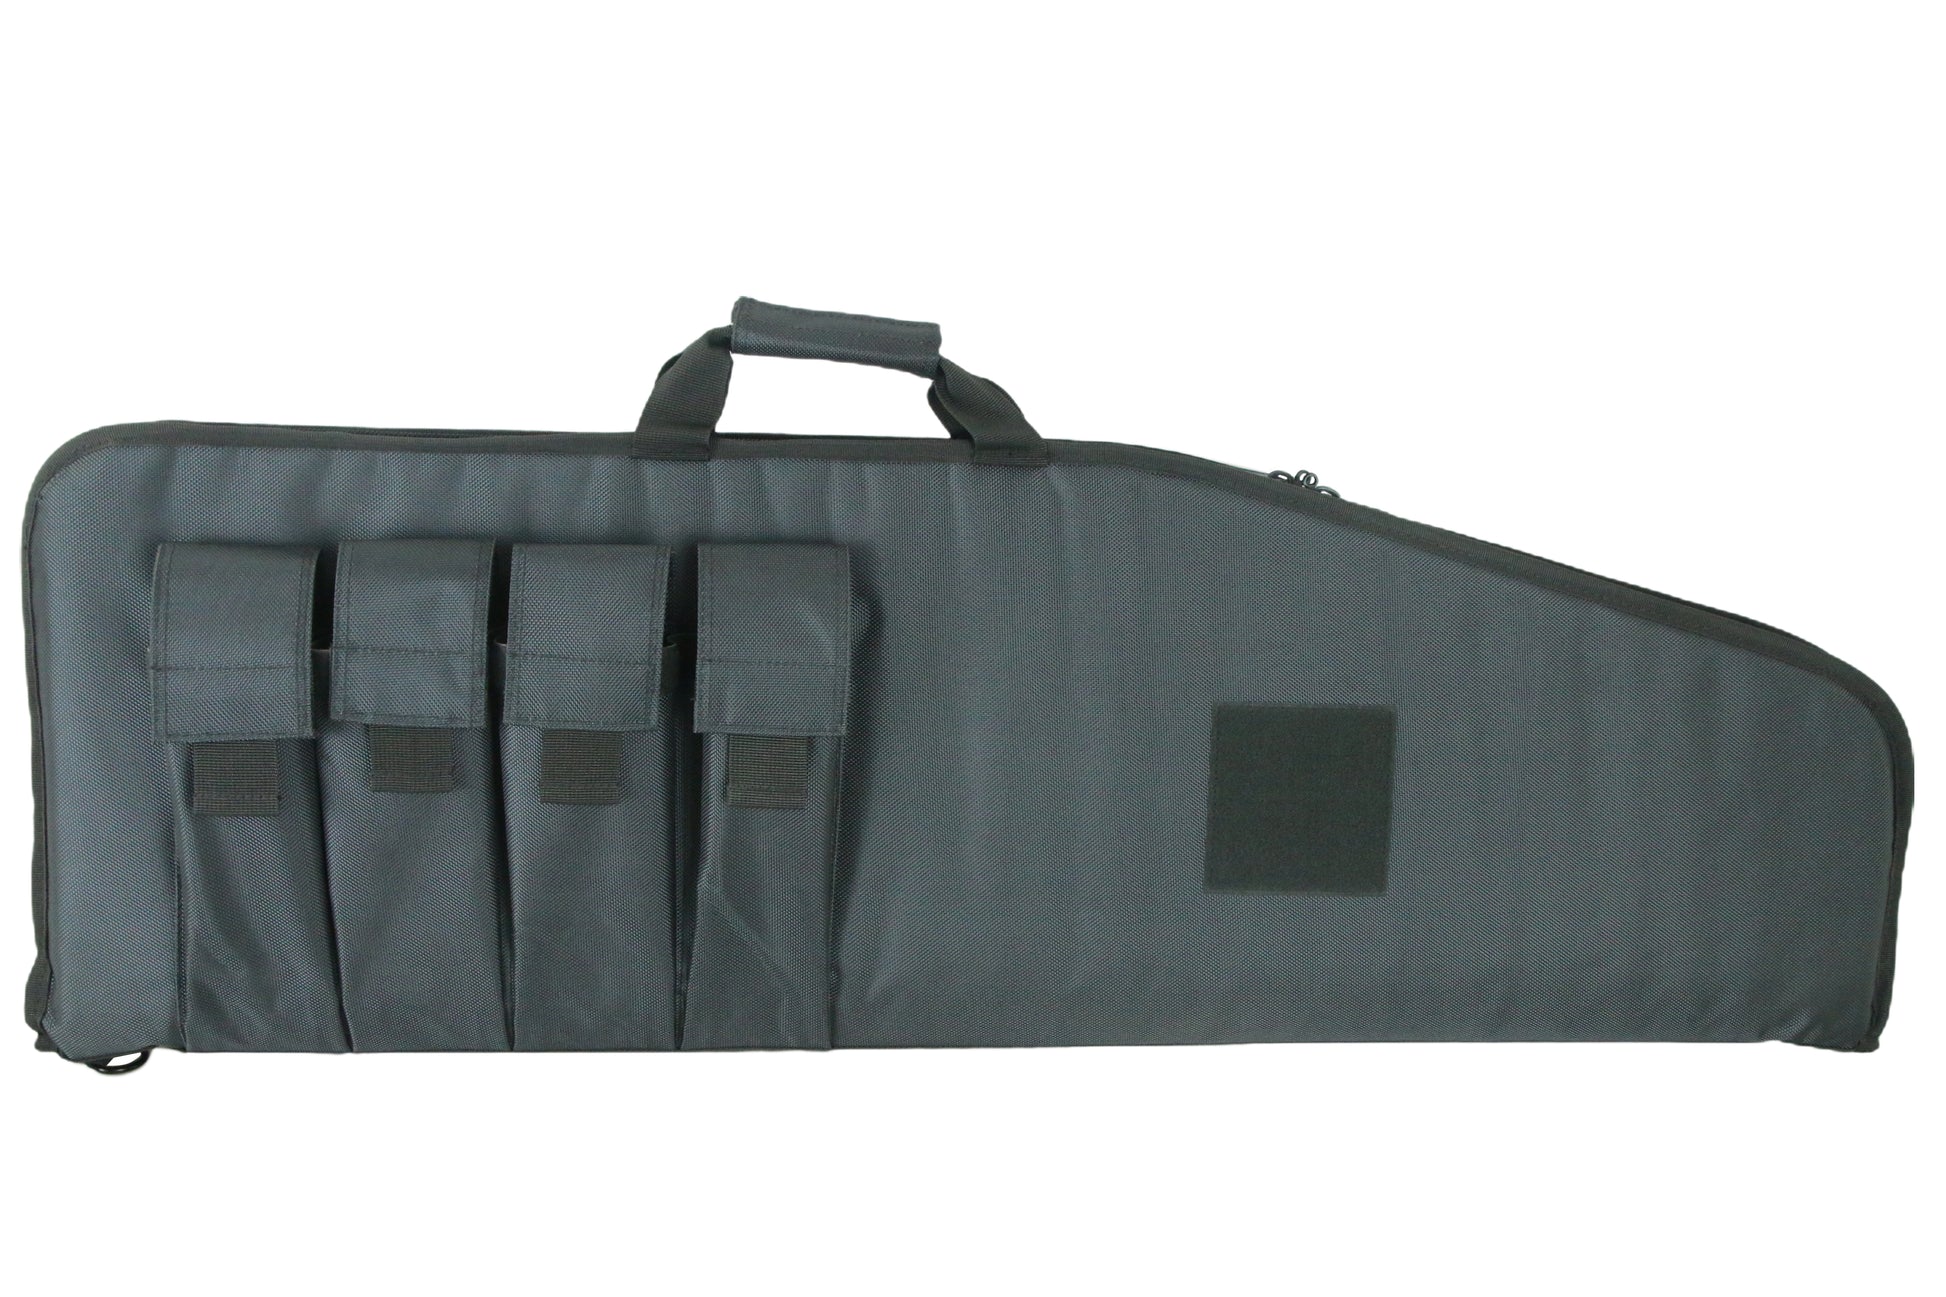 Tactical Single Soft Rifle Case w/Padded Handle Carrier 40 inches